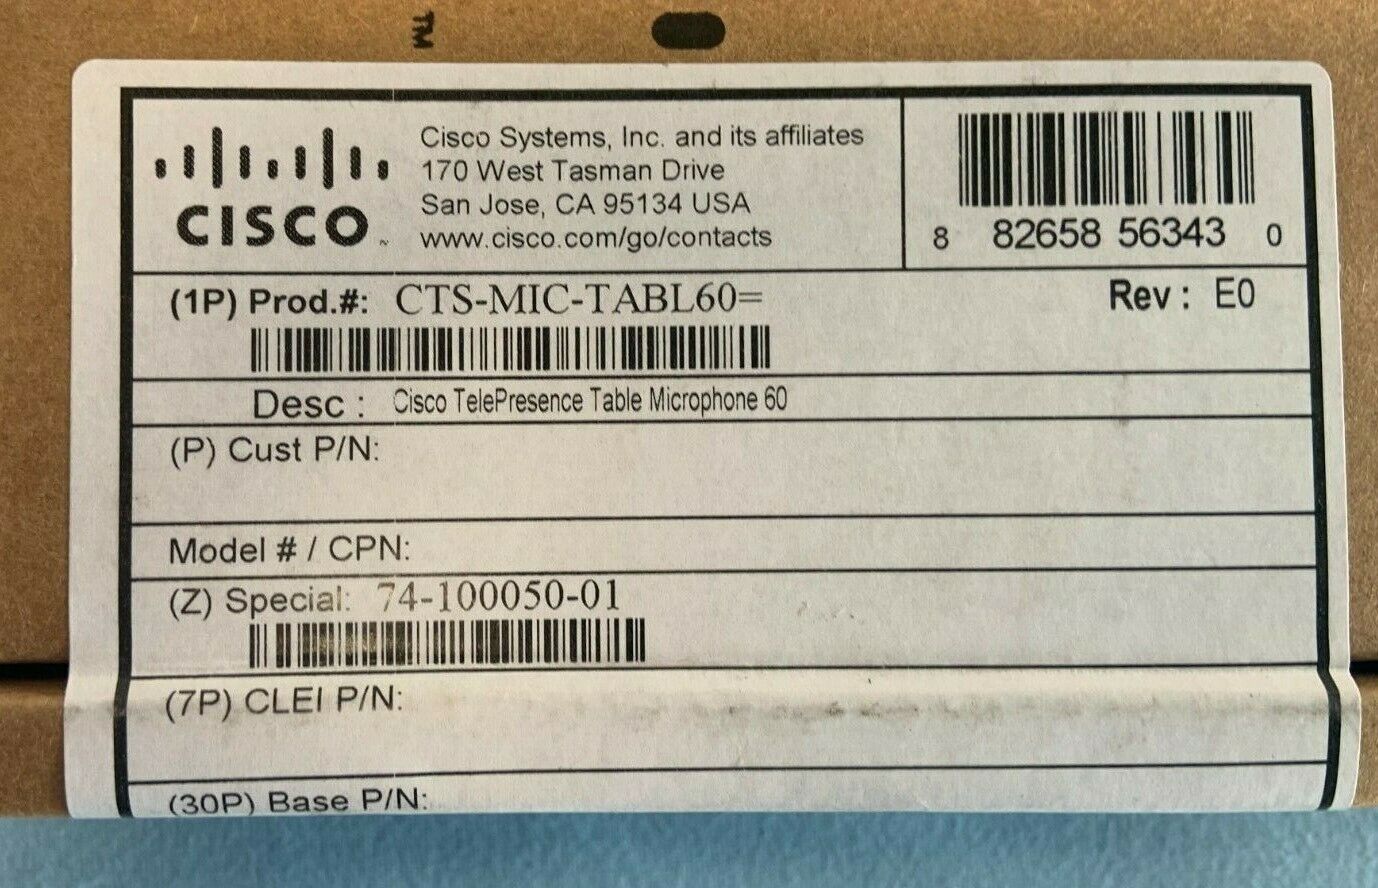 Cisco Telepresence Table Microphone 60 | CTS-MIC-TABL60 | 74-100050-01